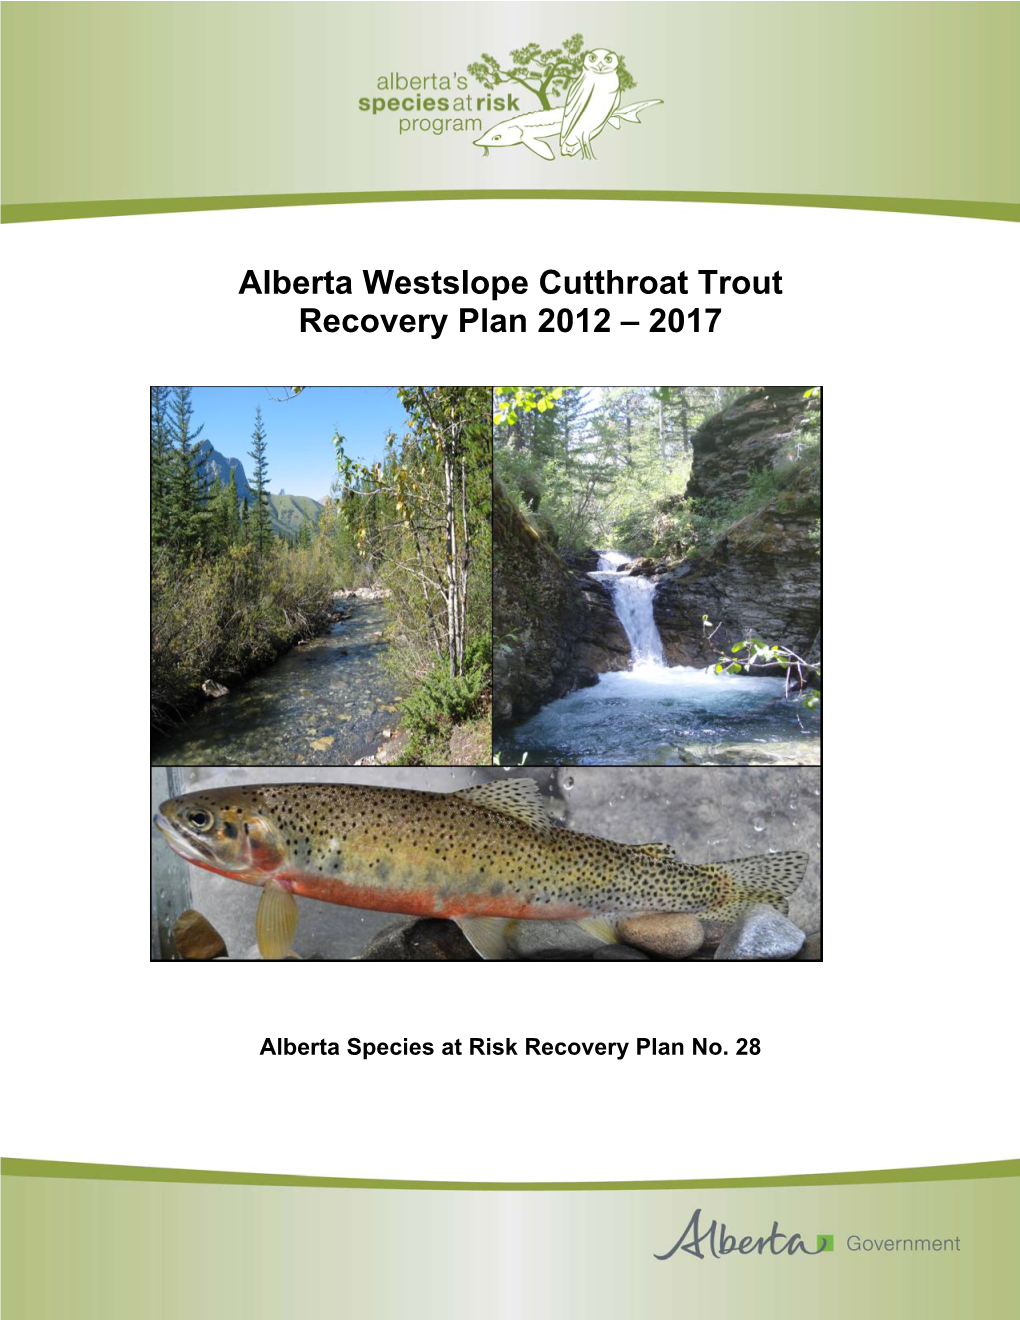 Alberta Westslope Cutthroat Trout Recovery Plan 2012 – 2017